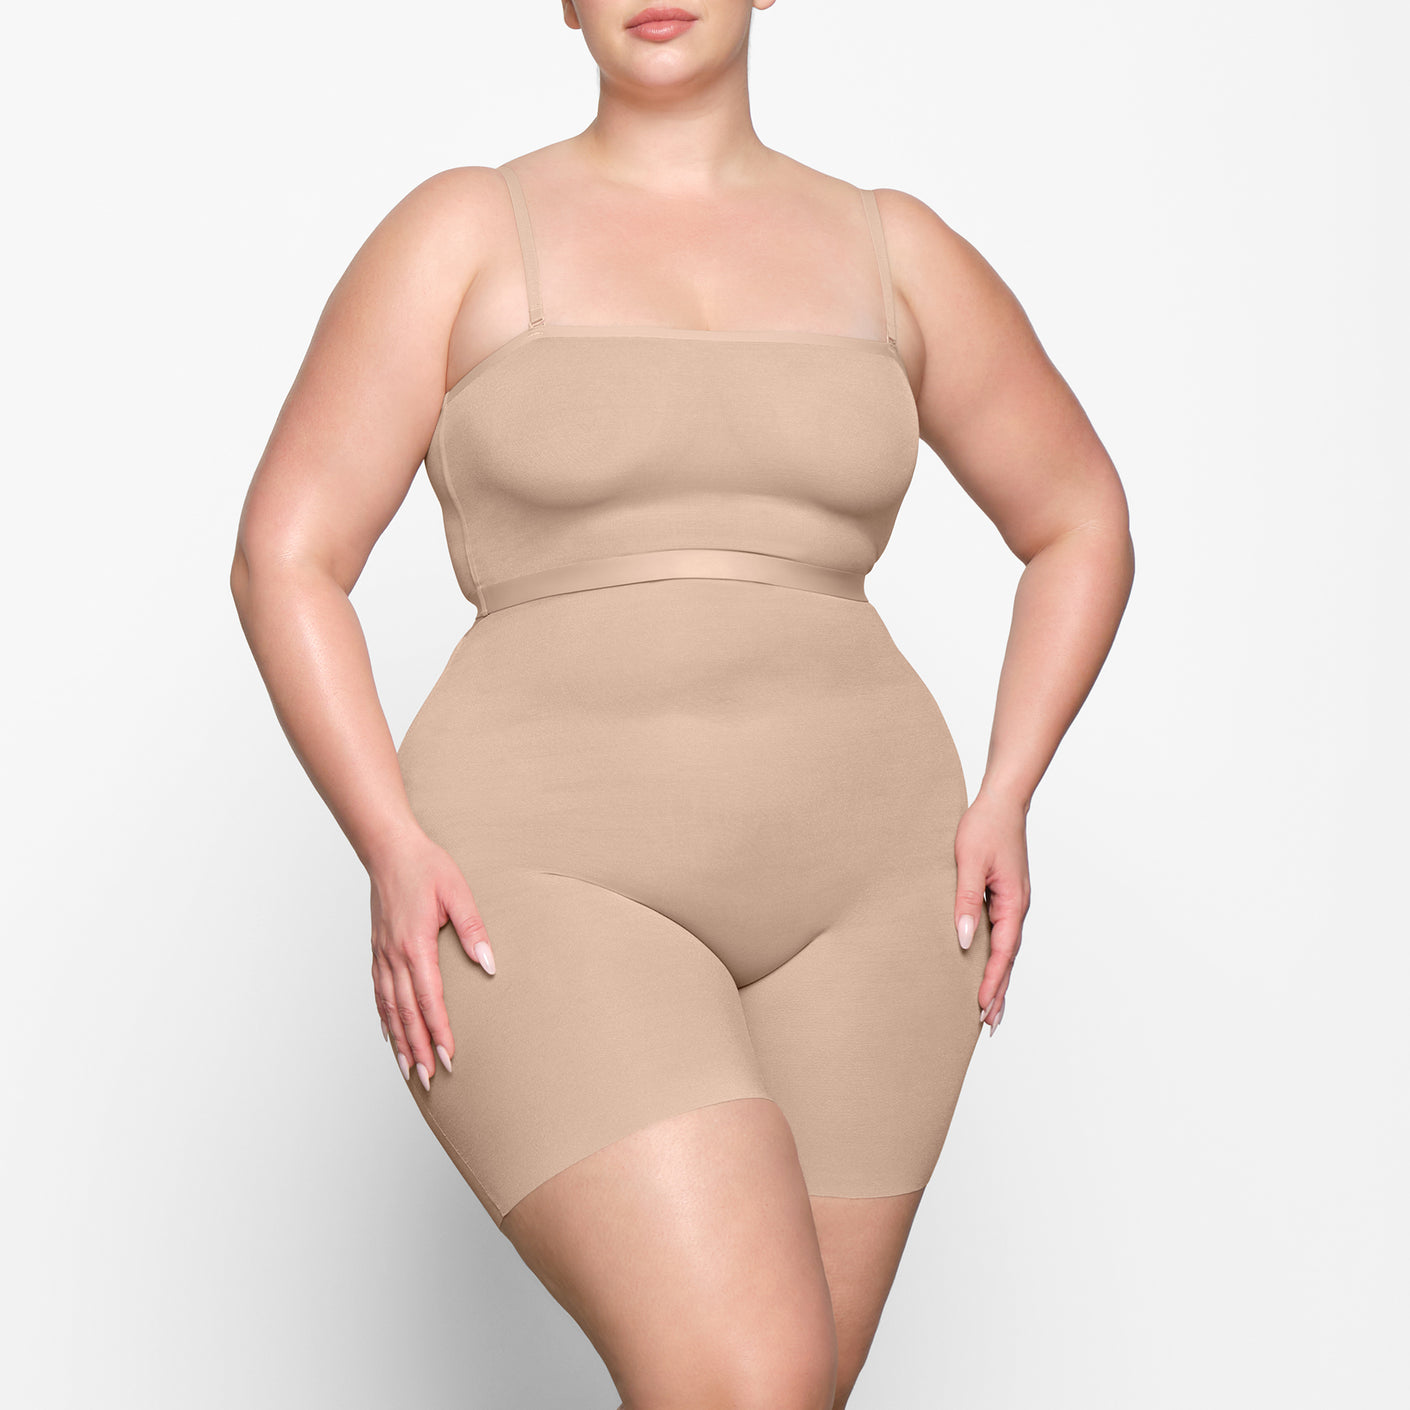 Here are 5 Shapewear Products You Must Have!